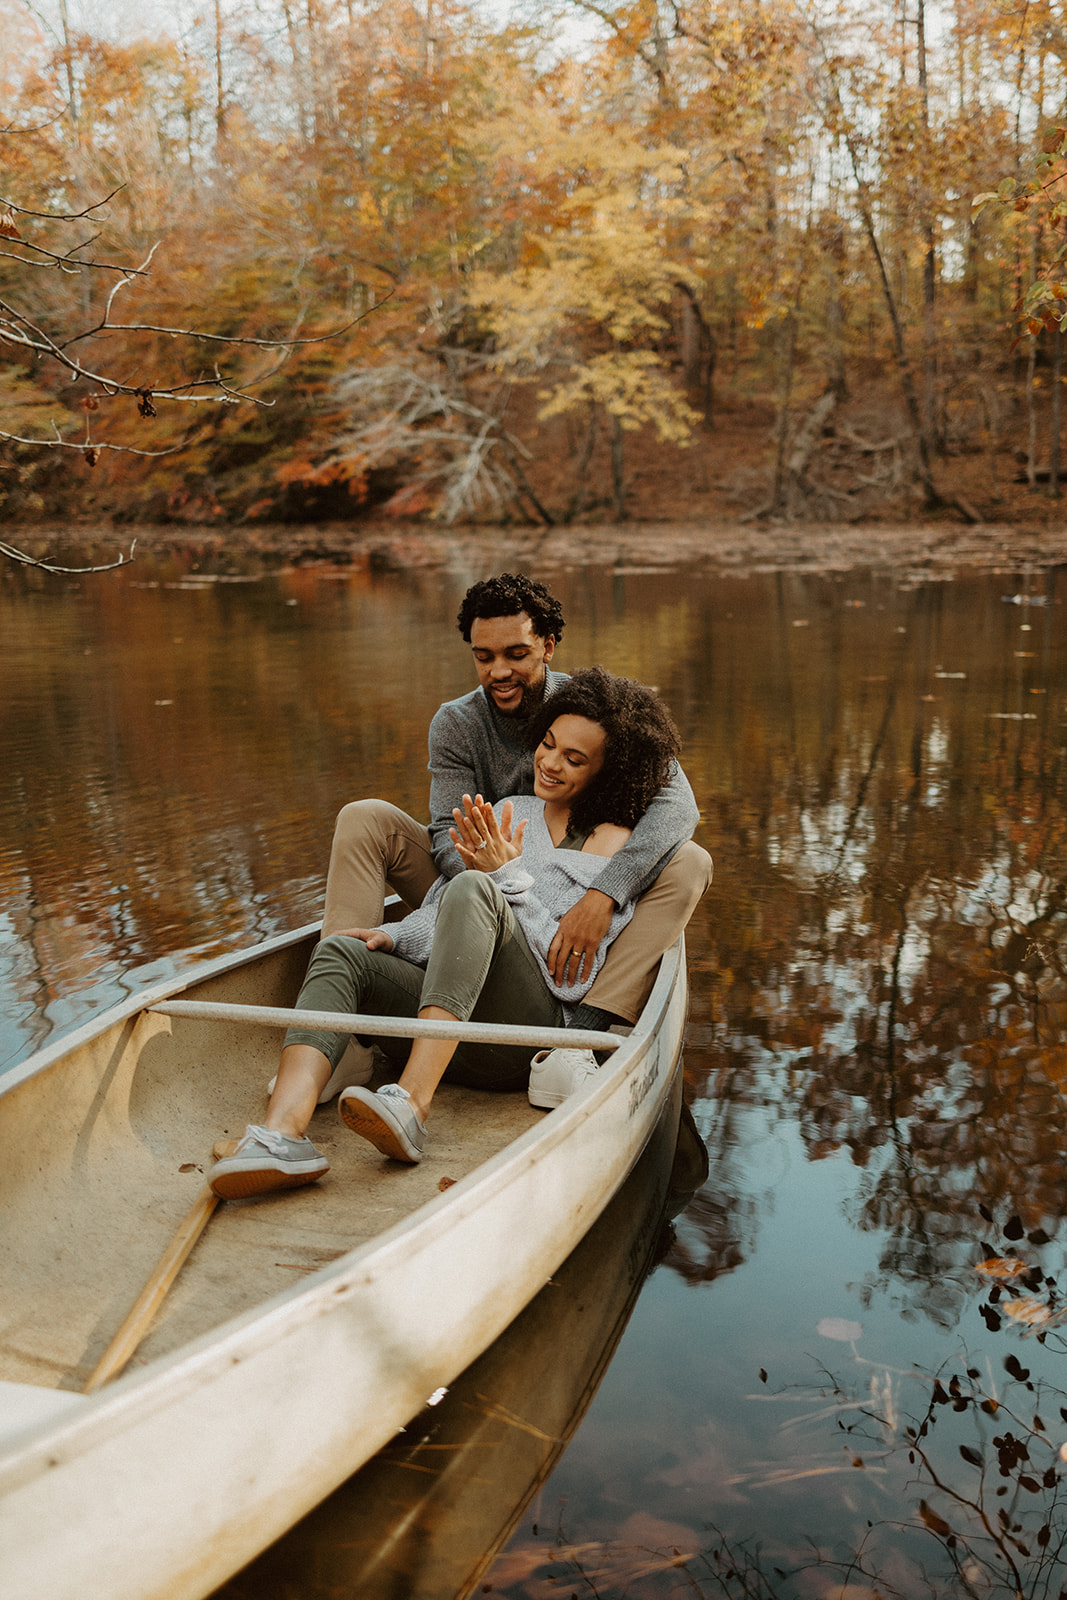 the couple sitting in the canoe together